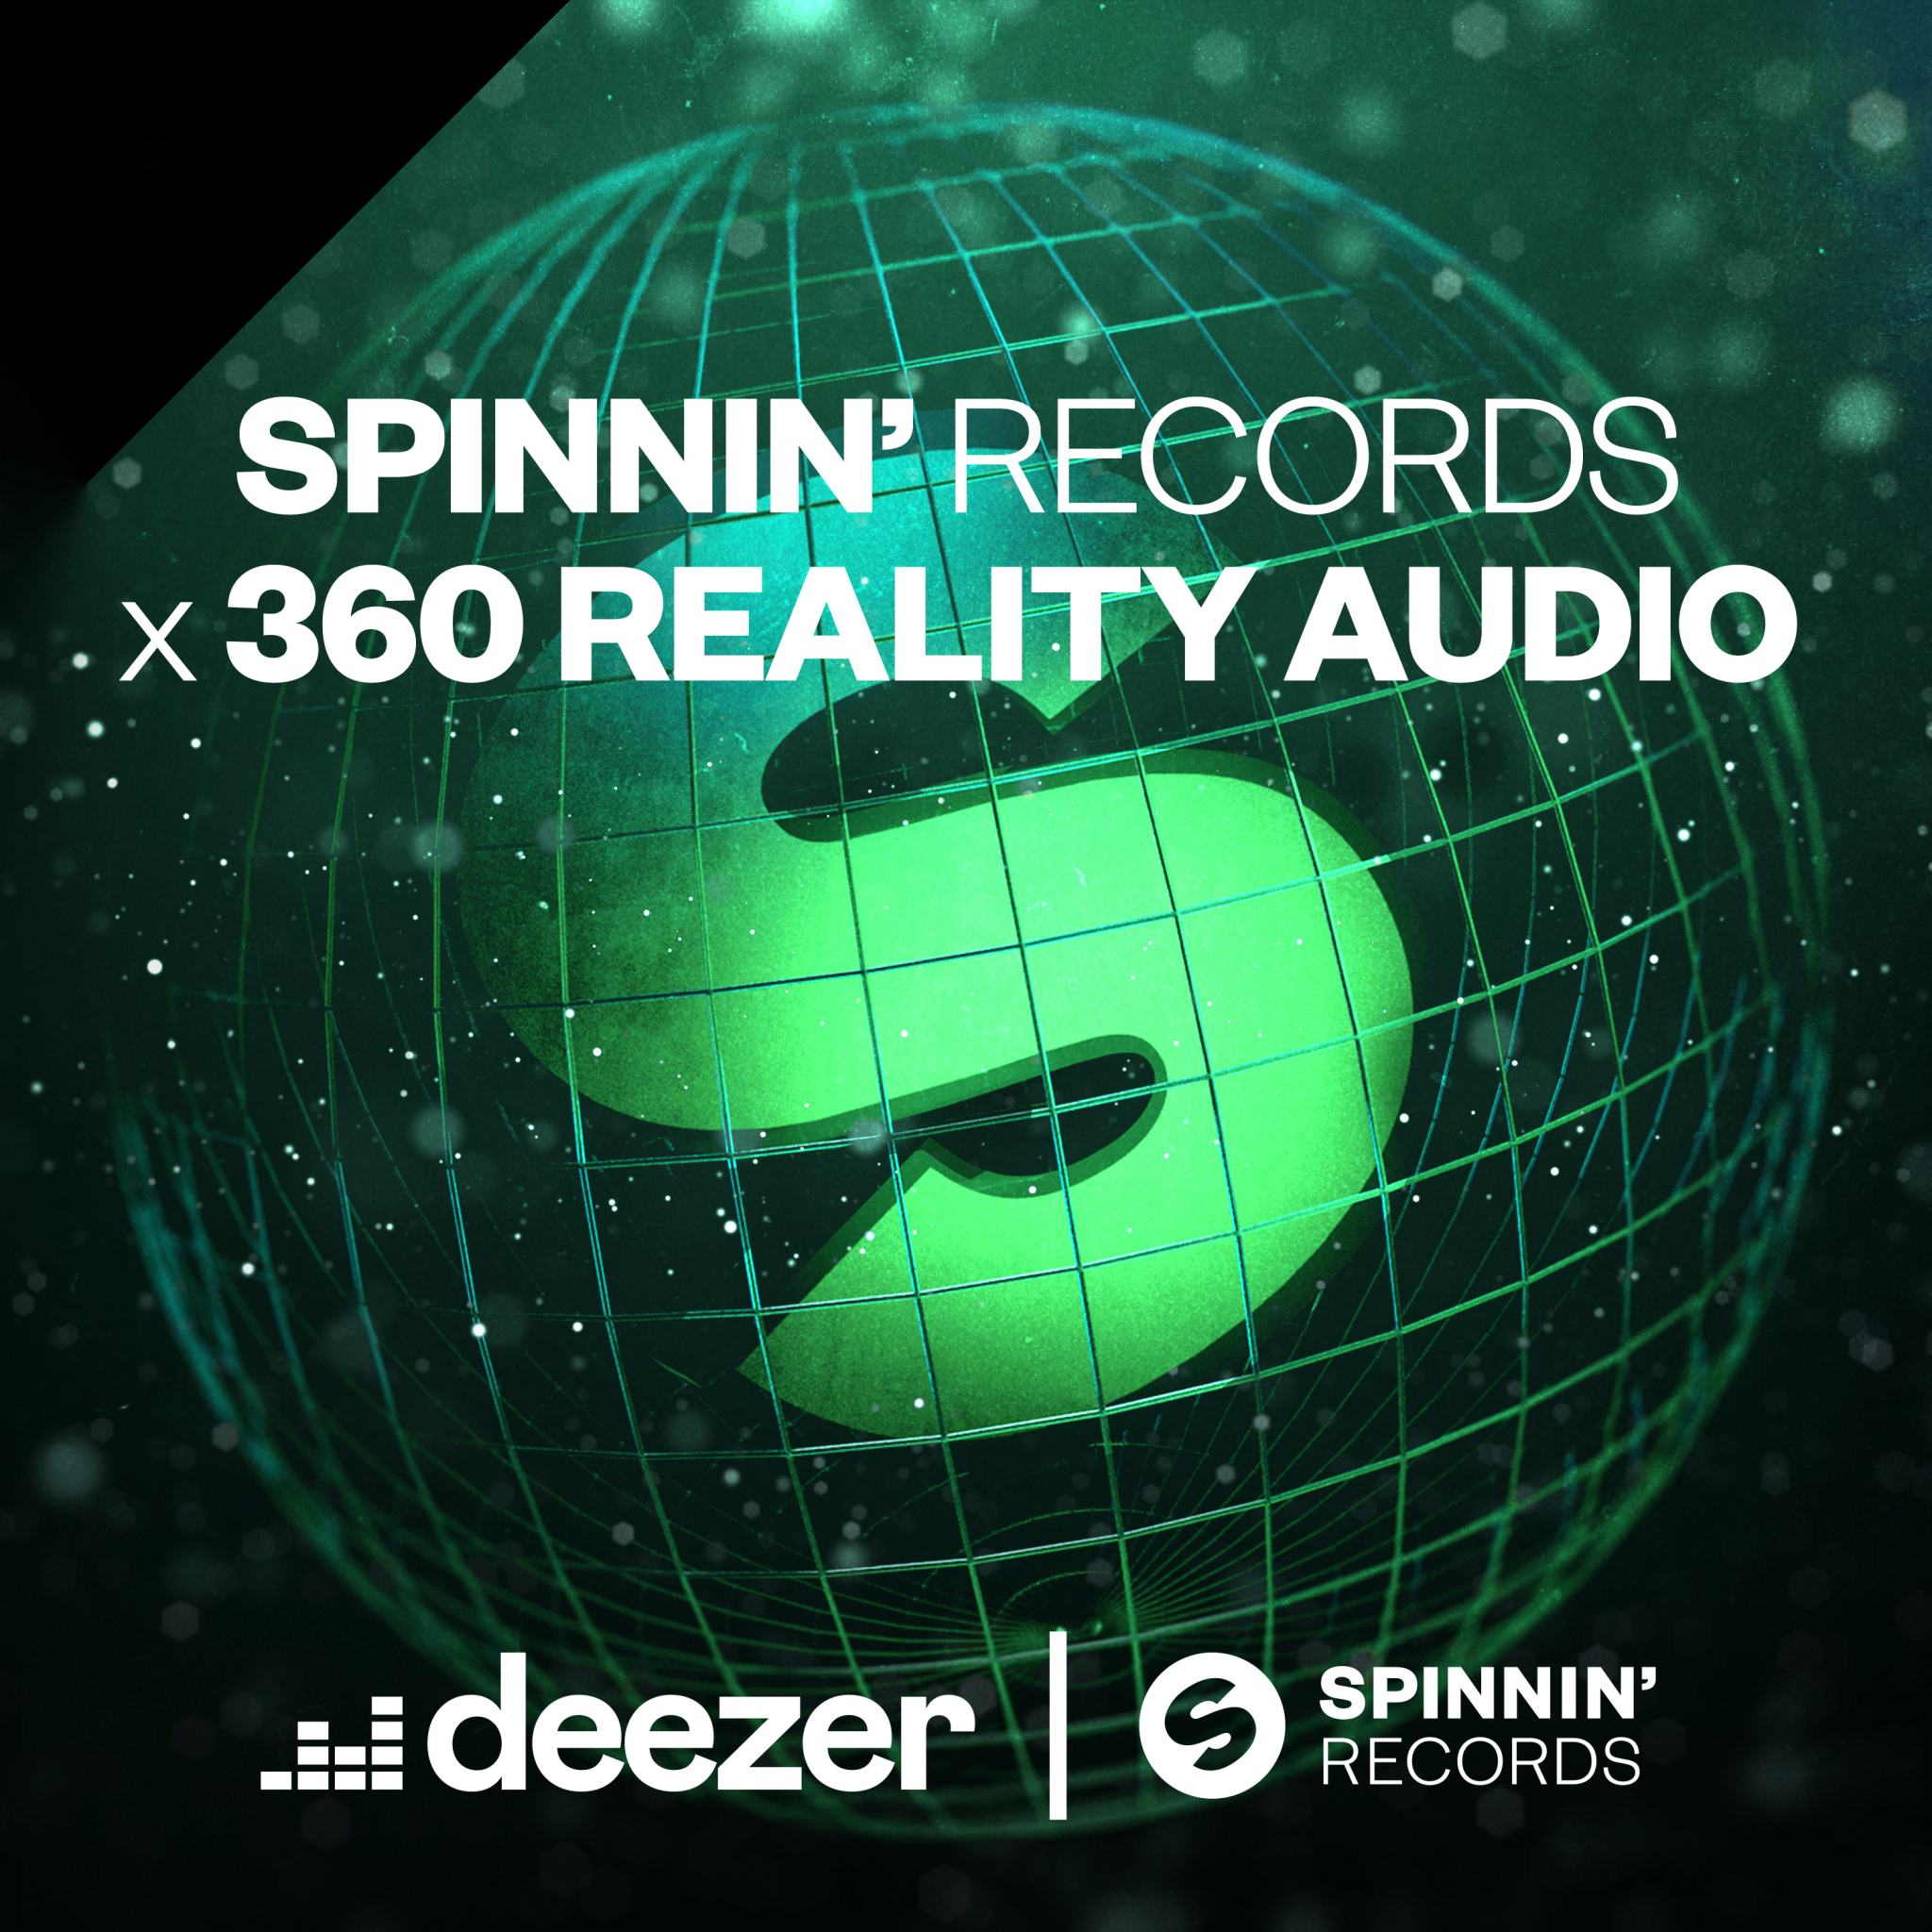 Deezer and Spinnin’ Records bring dance music to life with 360 Reality Audio